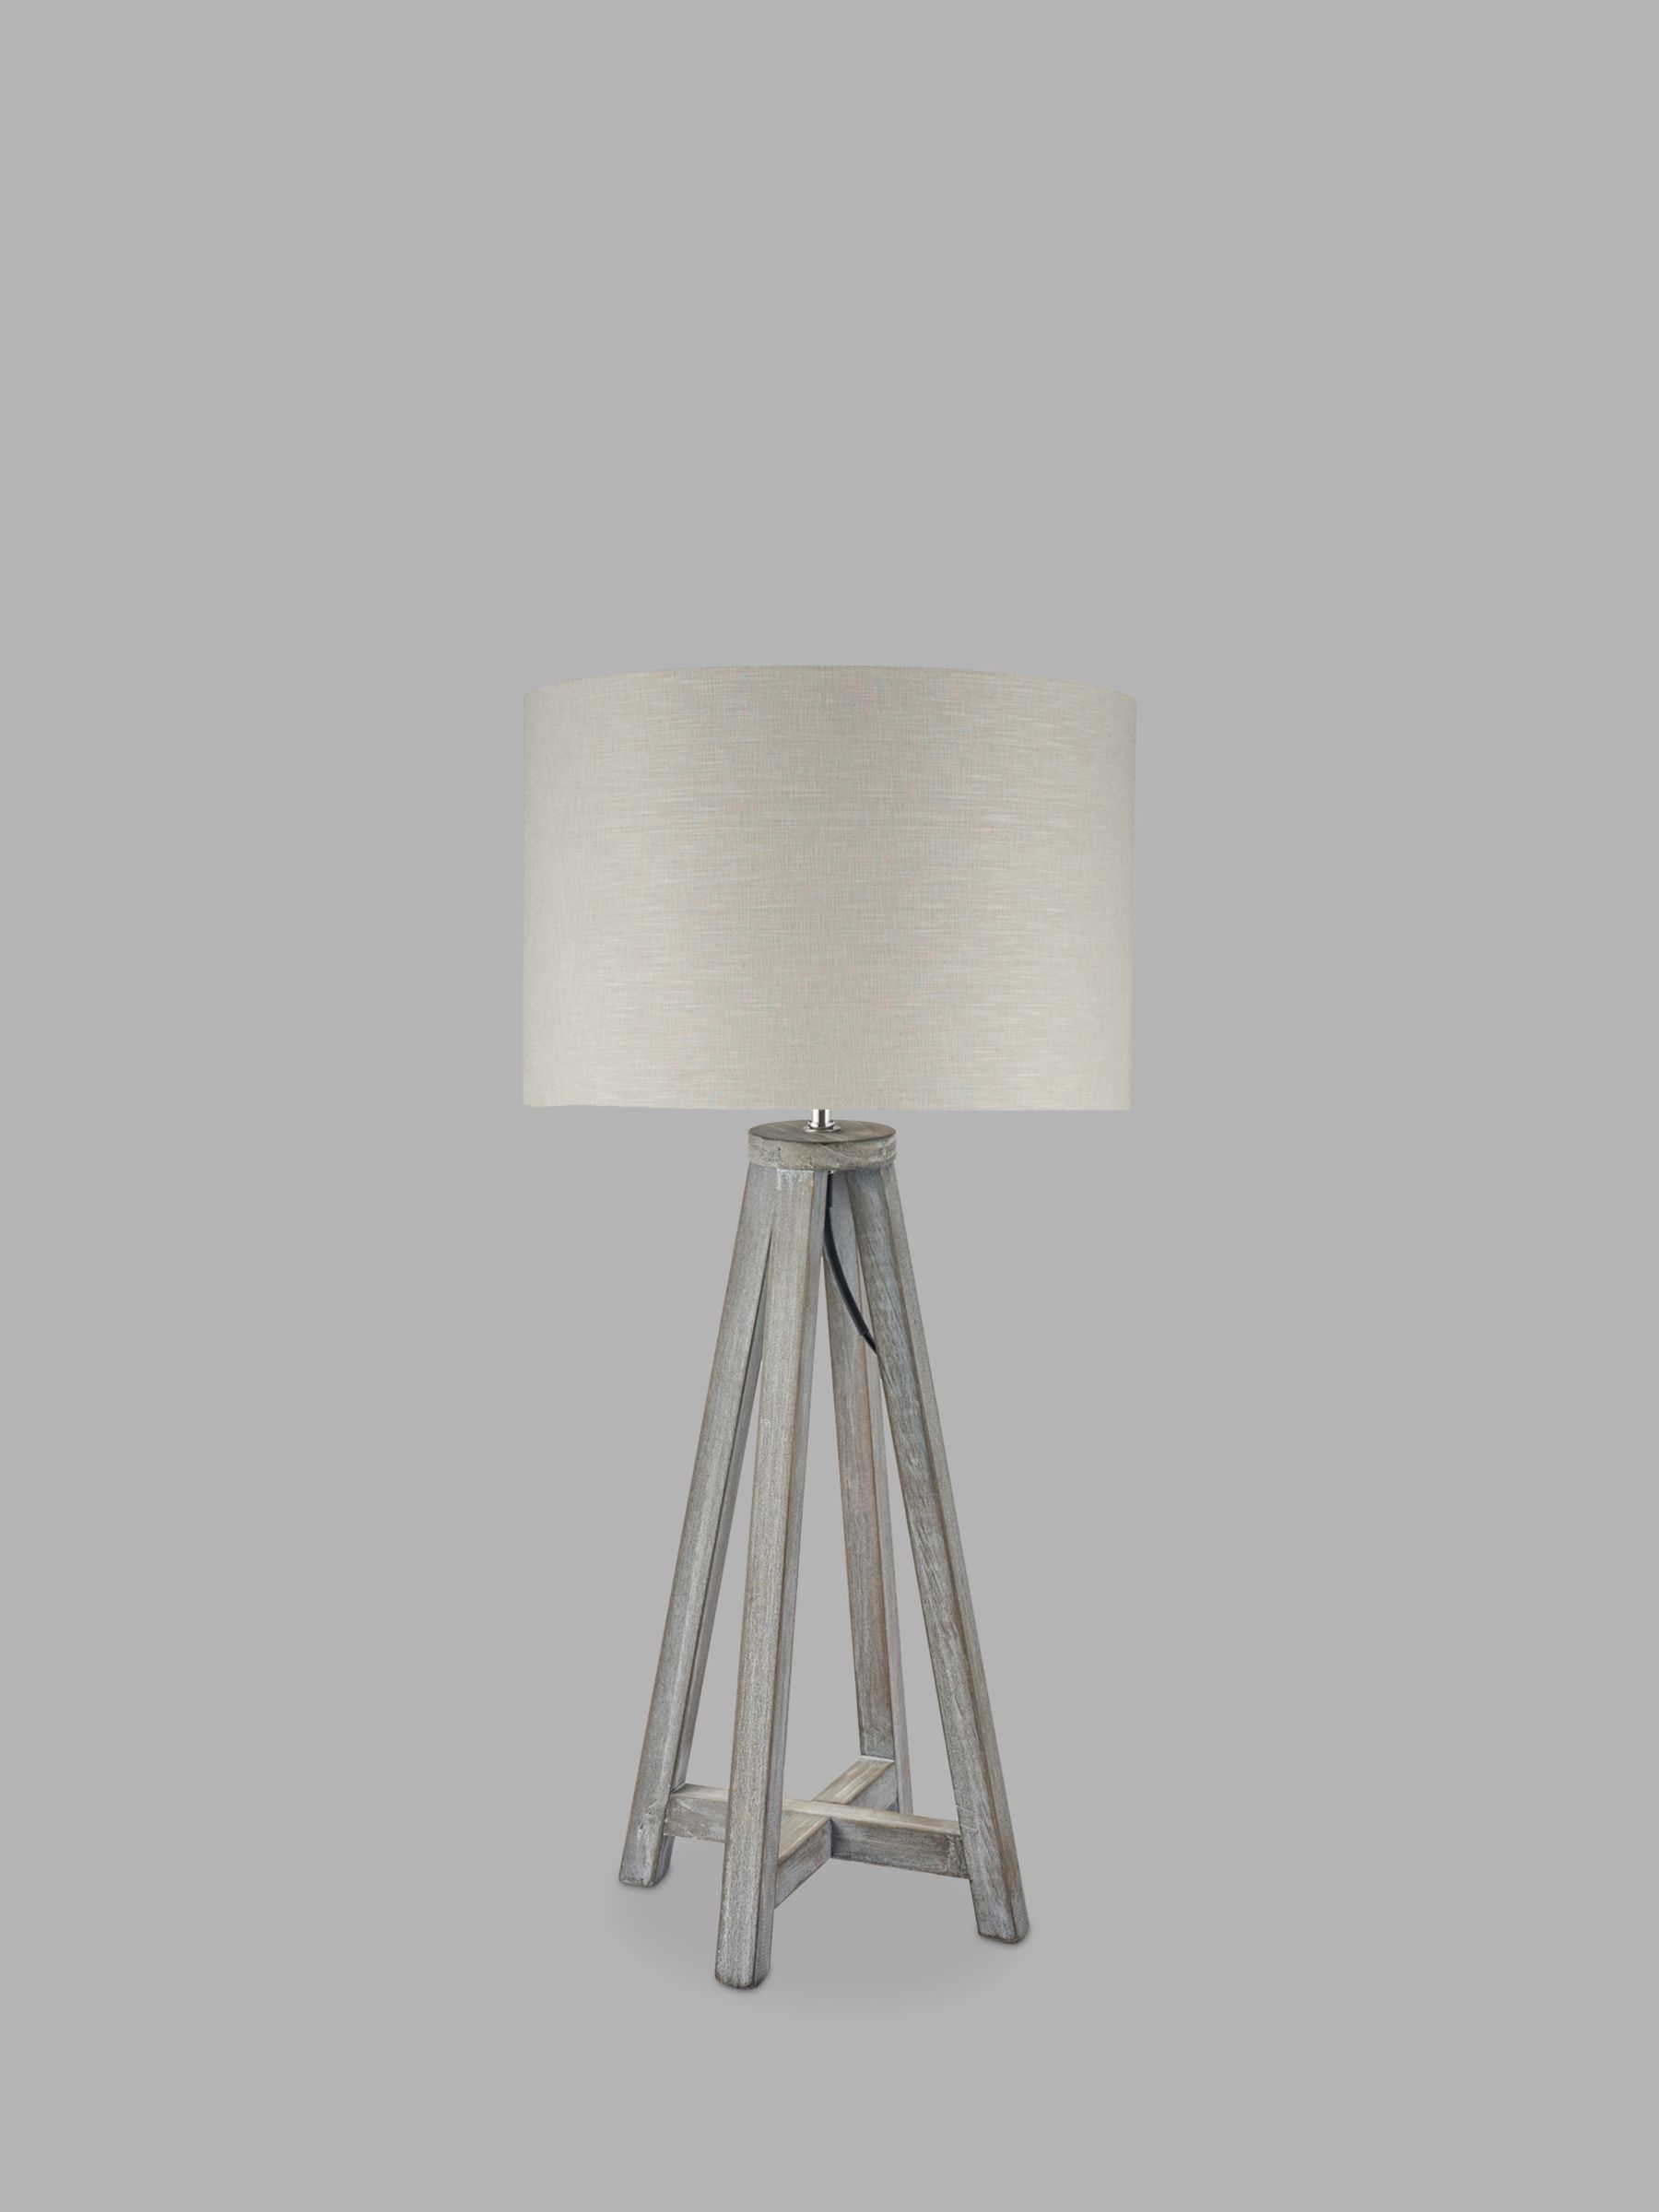 Photo of Pacific lifestyle whitby wooden table lamp grey